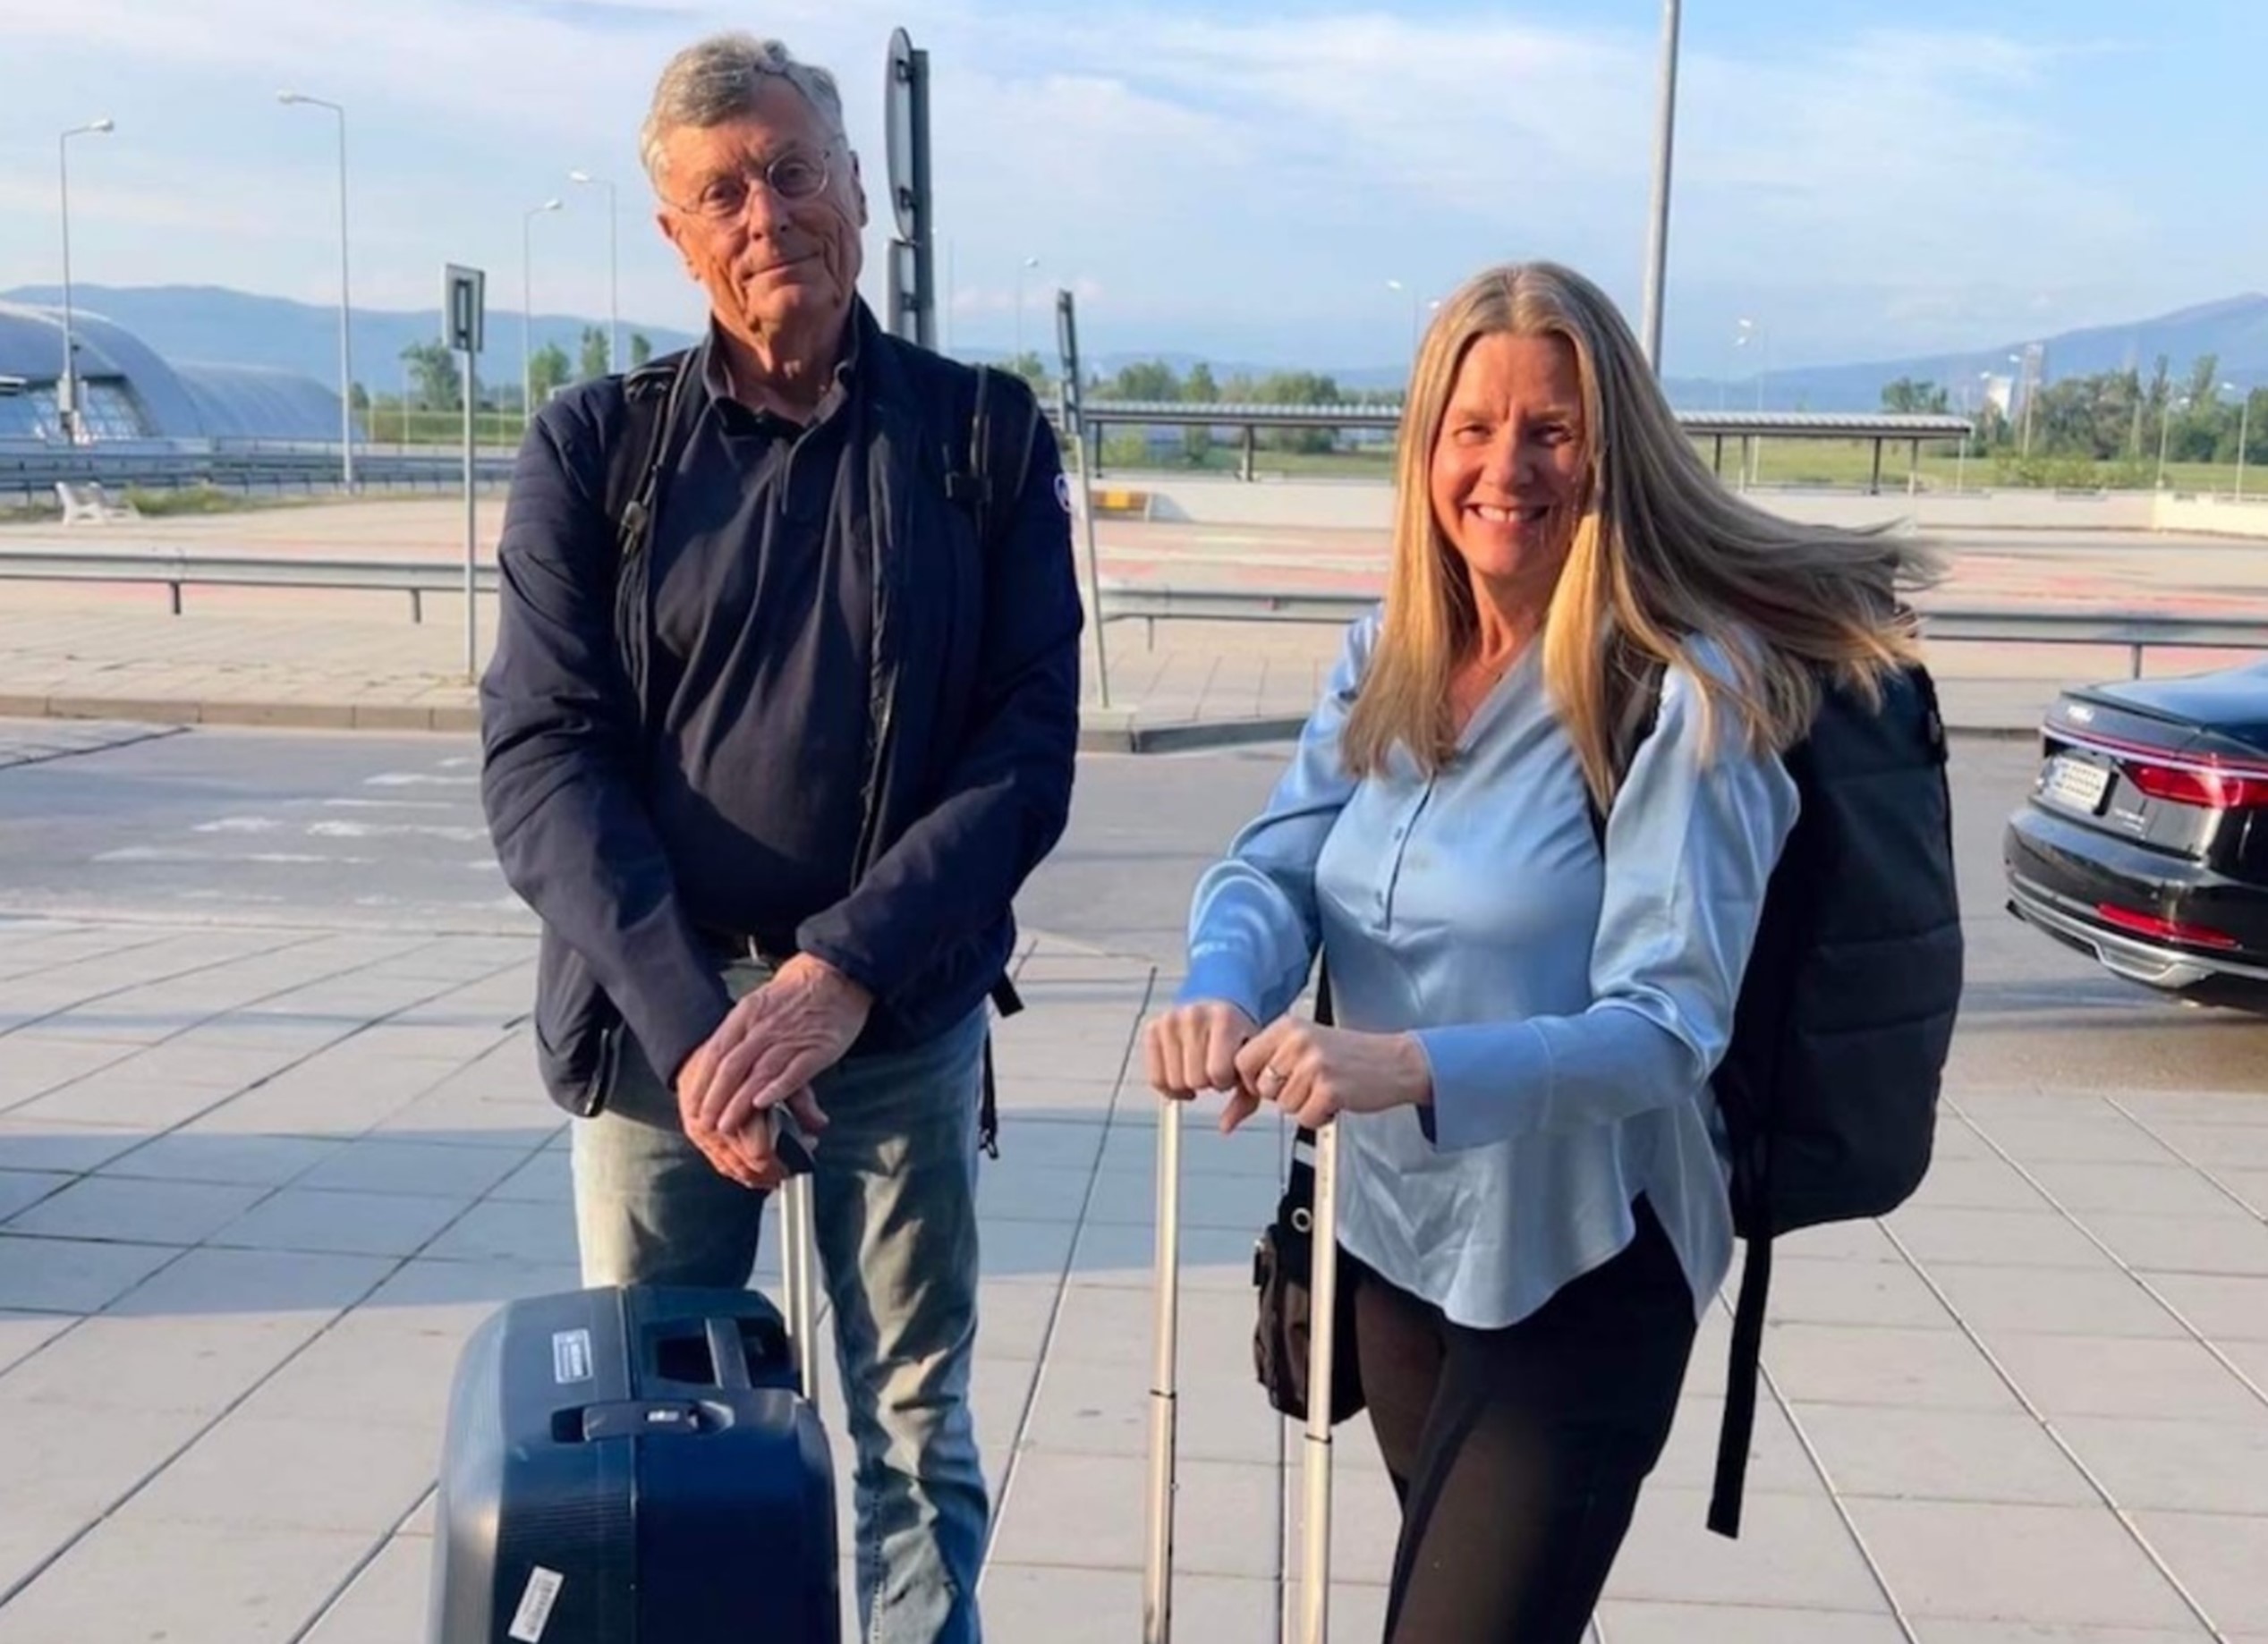 Jon T. Johnsen and Cathrine Moksness at the airport in Sofia on their way home after the study trip (Photo: Norwegian Courts Administration)